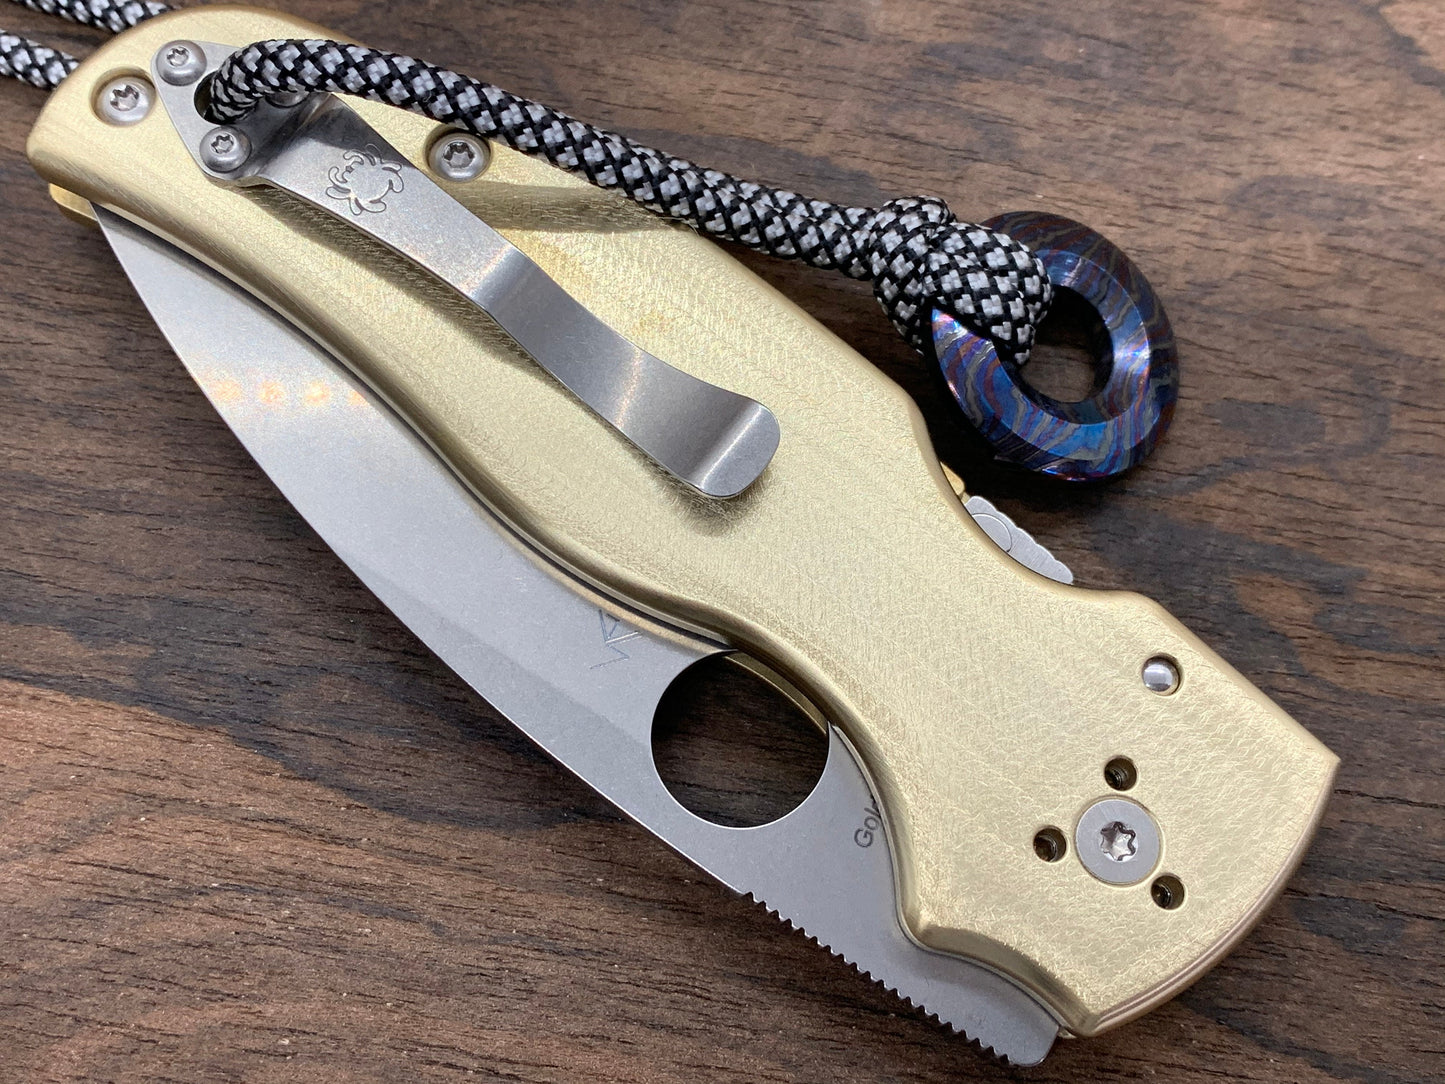 Deep Brushed Brass Scales for SHAMAN Spyderco